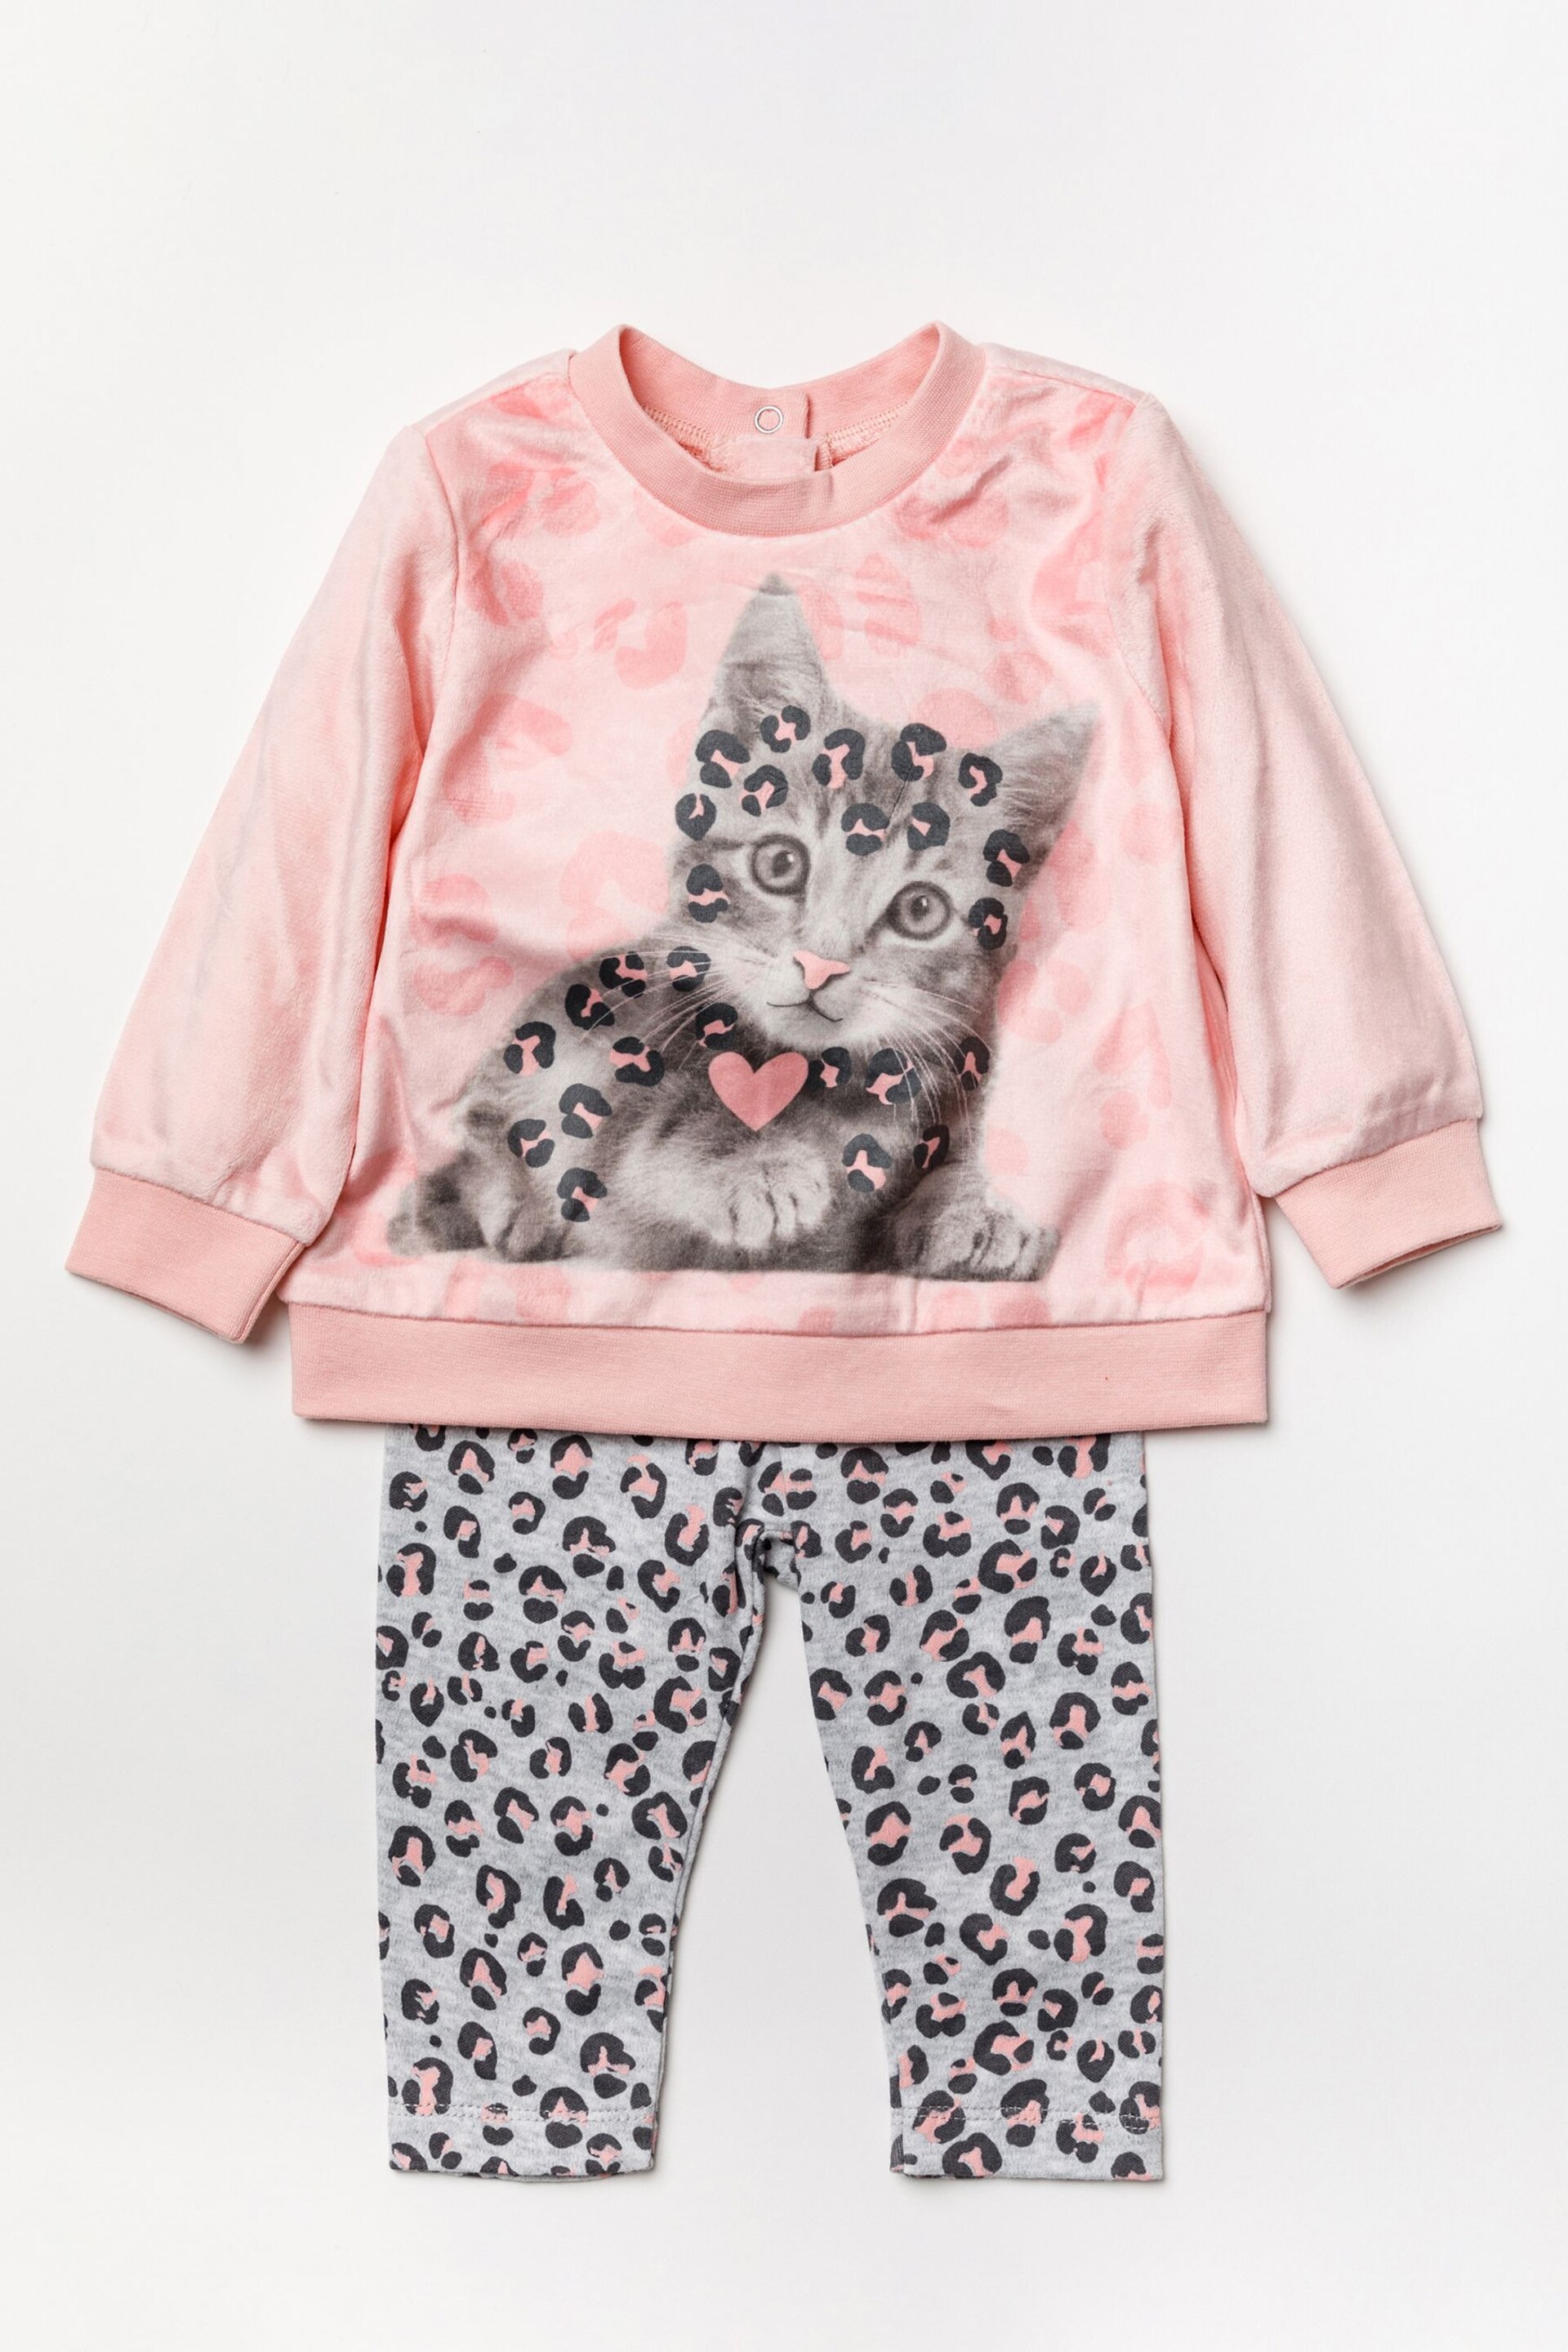 Lily & Jack Pink Cat Print Cotton 2-Piece Top and Trouser Set - Image 1 of 3